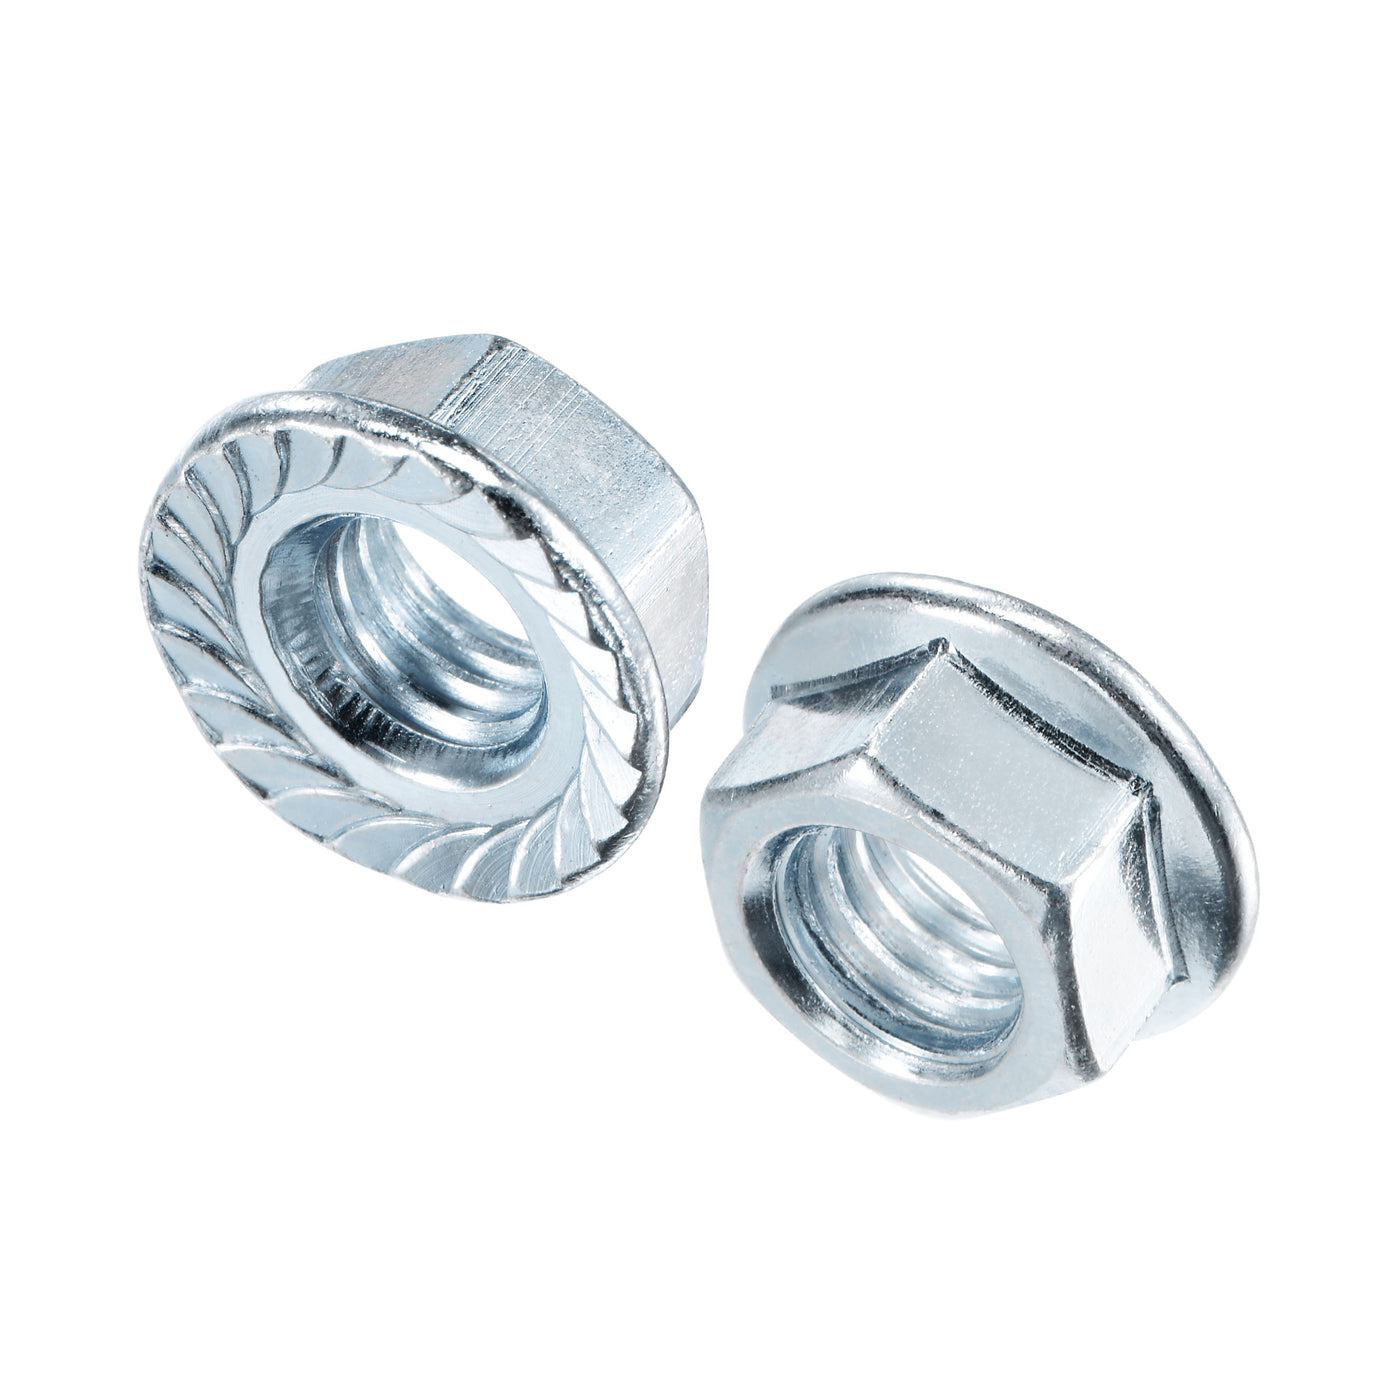 uxcell Uxcell Hex Flange Nuts, Carbon Steel Zinc Plated